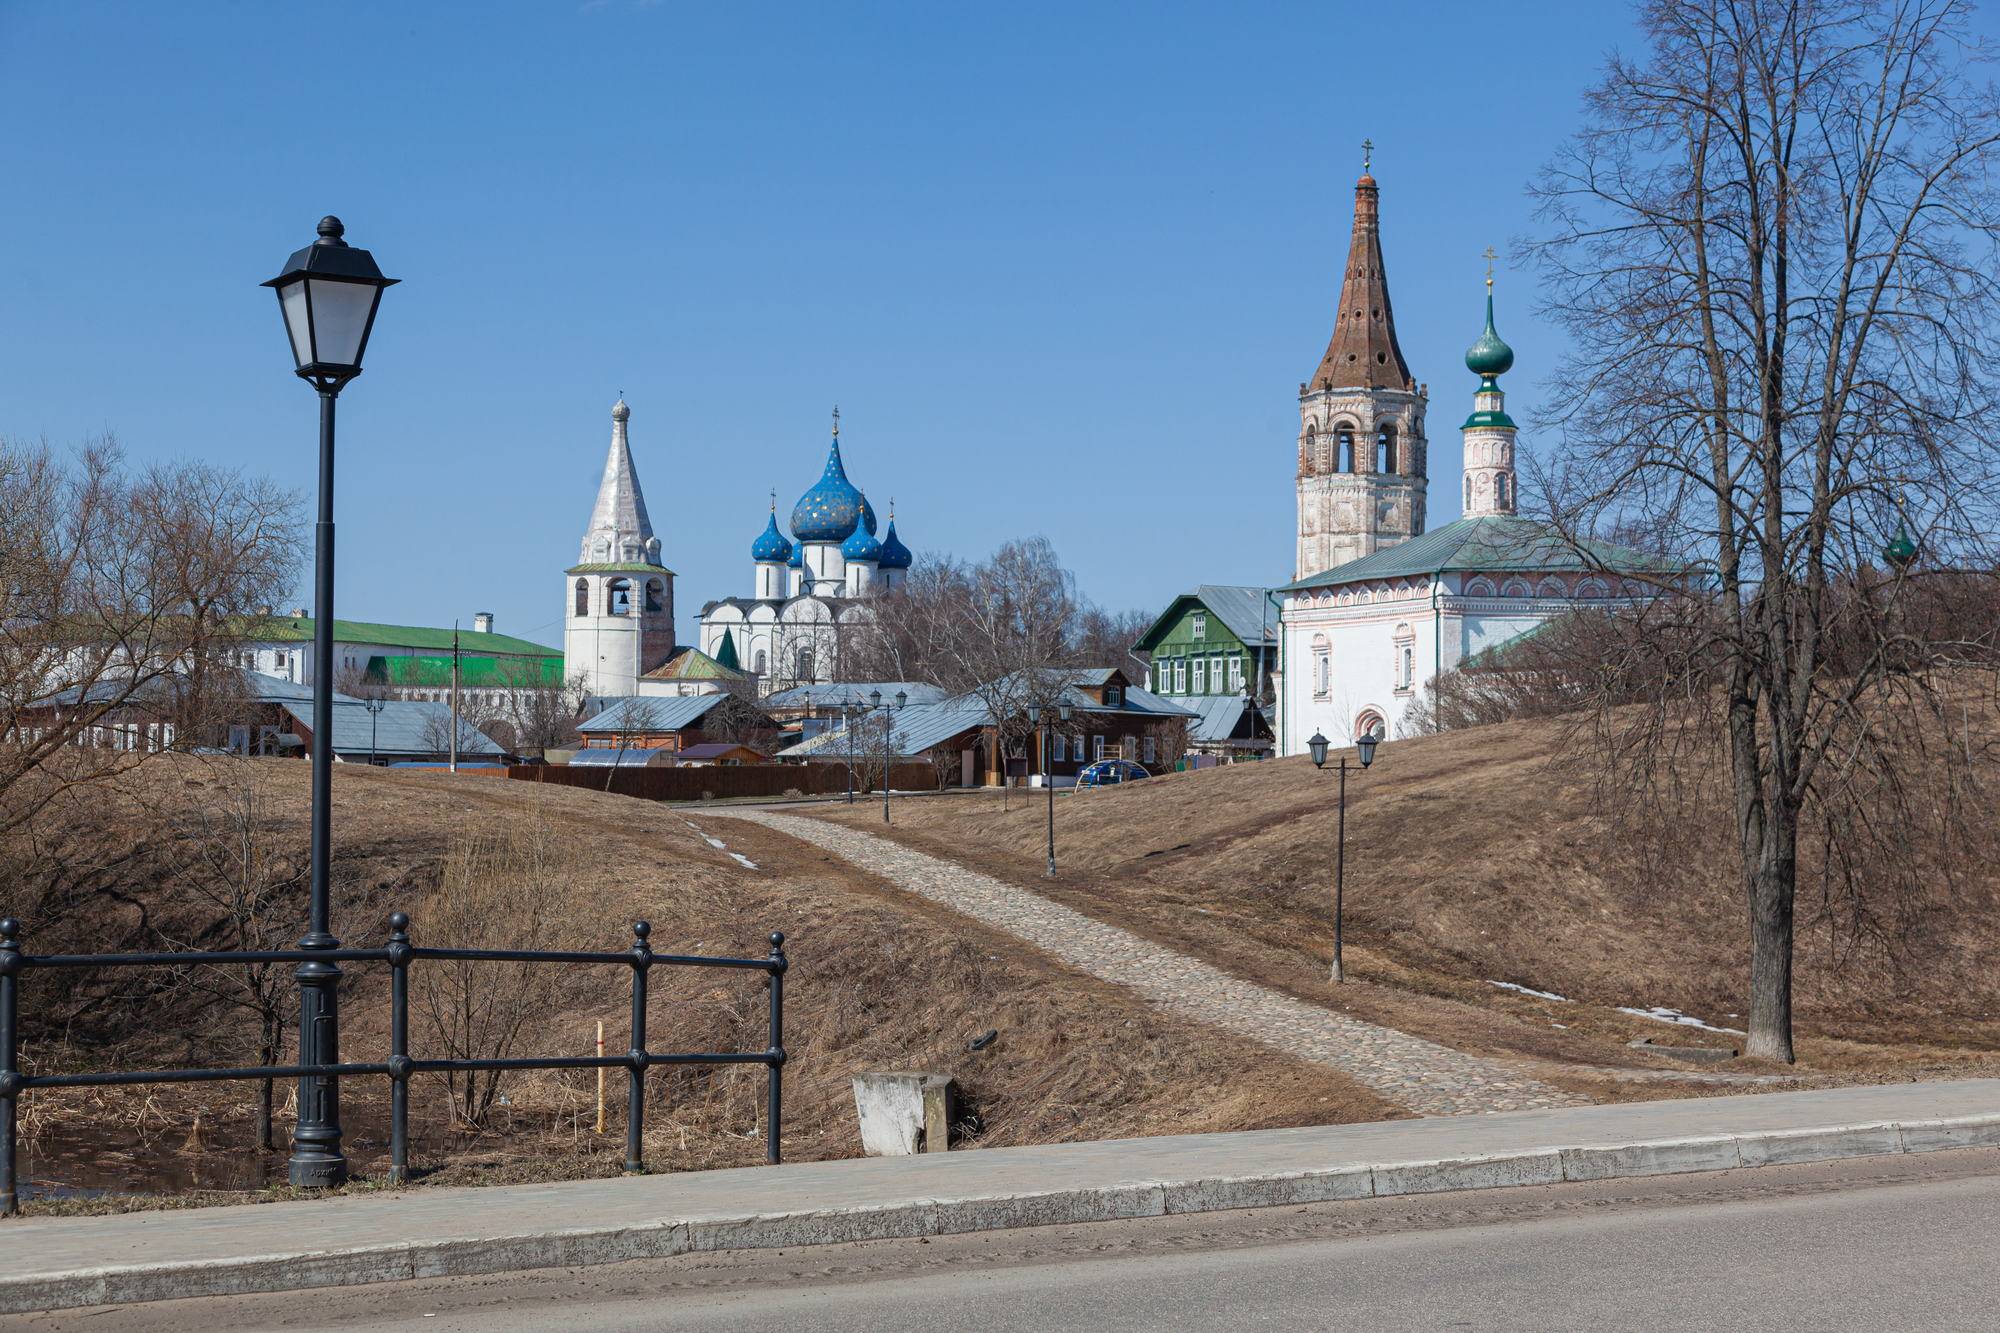 A little more about the city of Suzdal